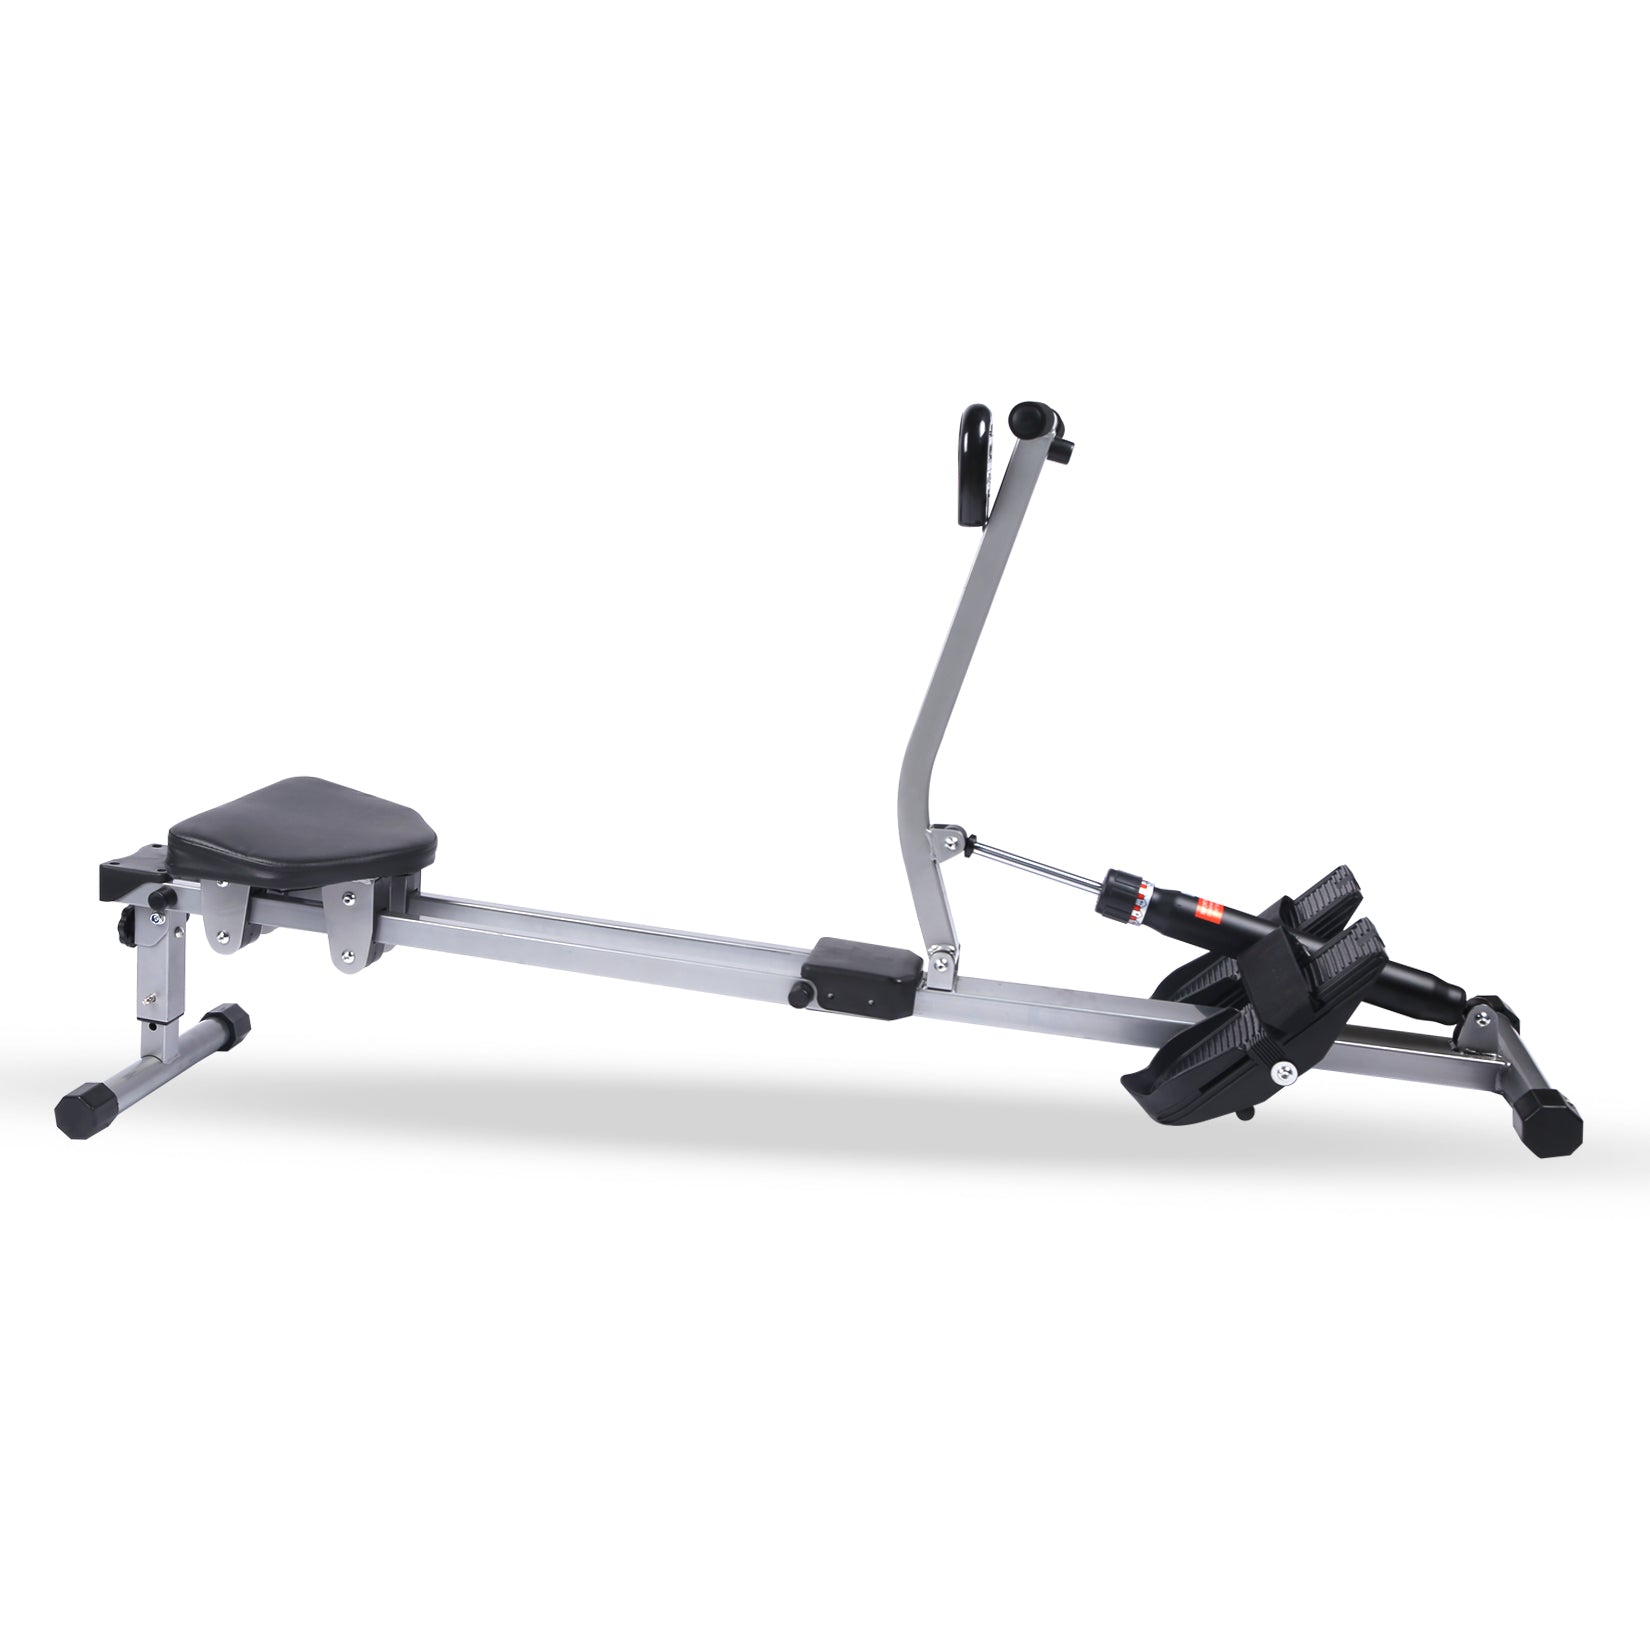 Fitness Rowing Machine Rower Ergometer, with 12 Levels of Adjustable Resistance, Digital Monitor and 260 lbs of Maximum Load, Black MLNshops